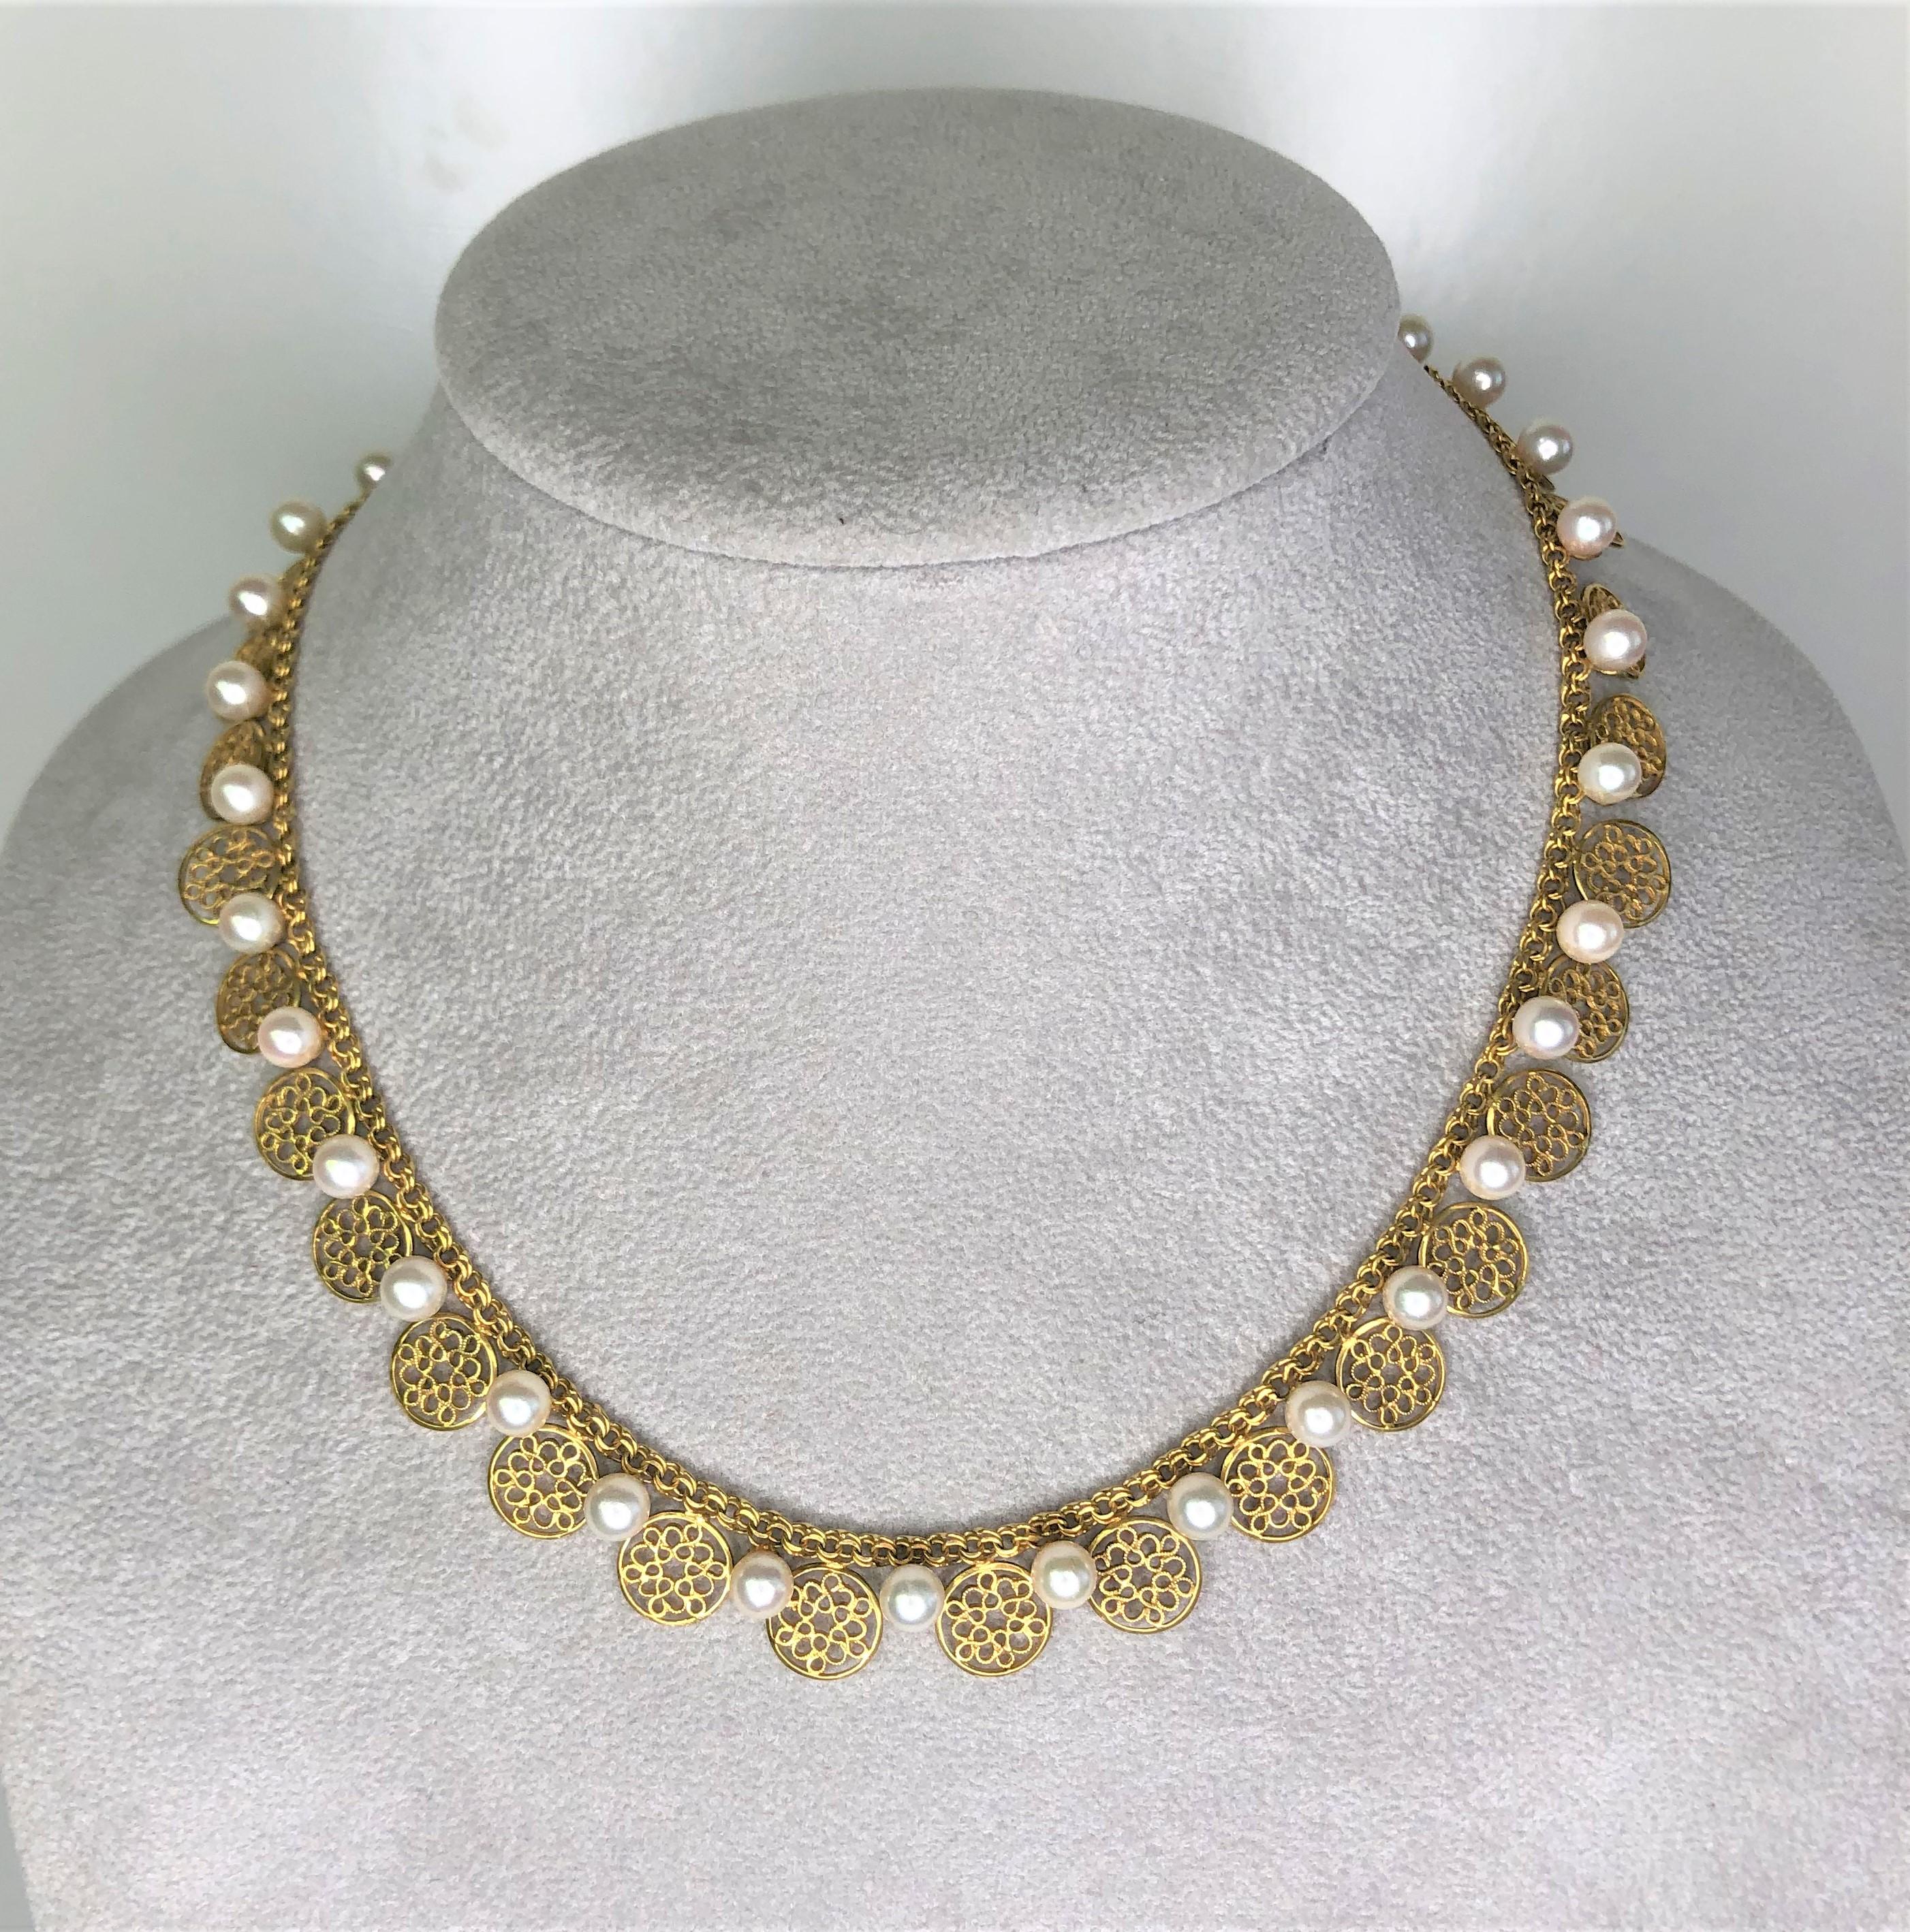 This one-of-a-kind piece will get noticed!  Dress it up or down, wear it every day!
14 karat yellow gold. 
16 inches long and adjustable to 14.5 inches
34 white 5-5.5mm high luster cultured pearls.
33 circle 'floral' cut out detail, approximately